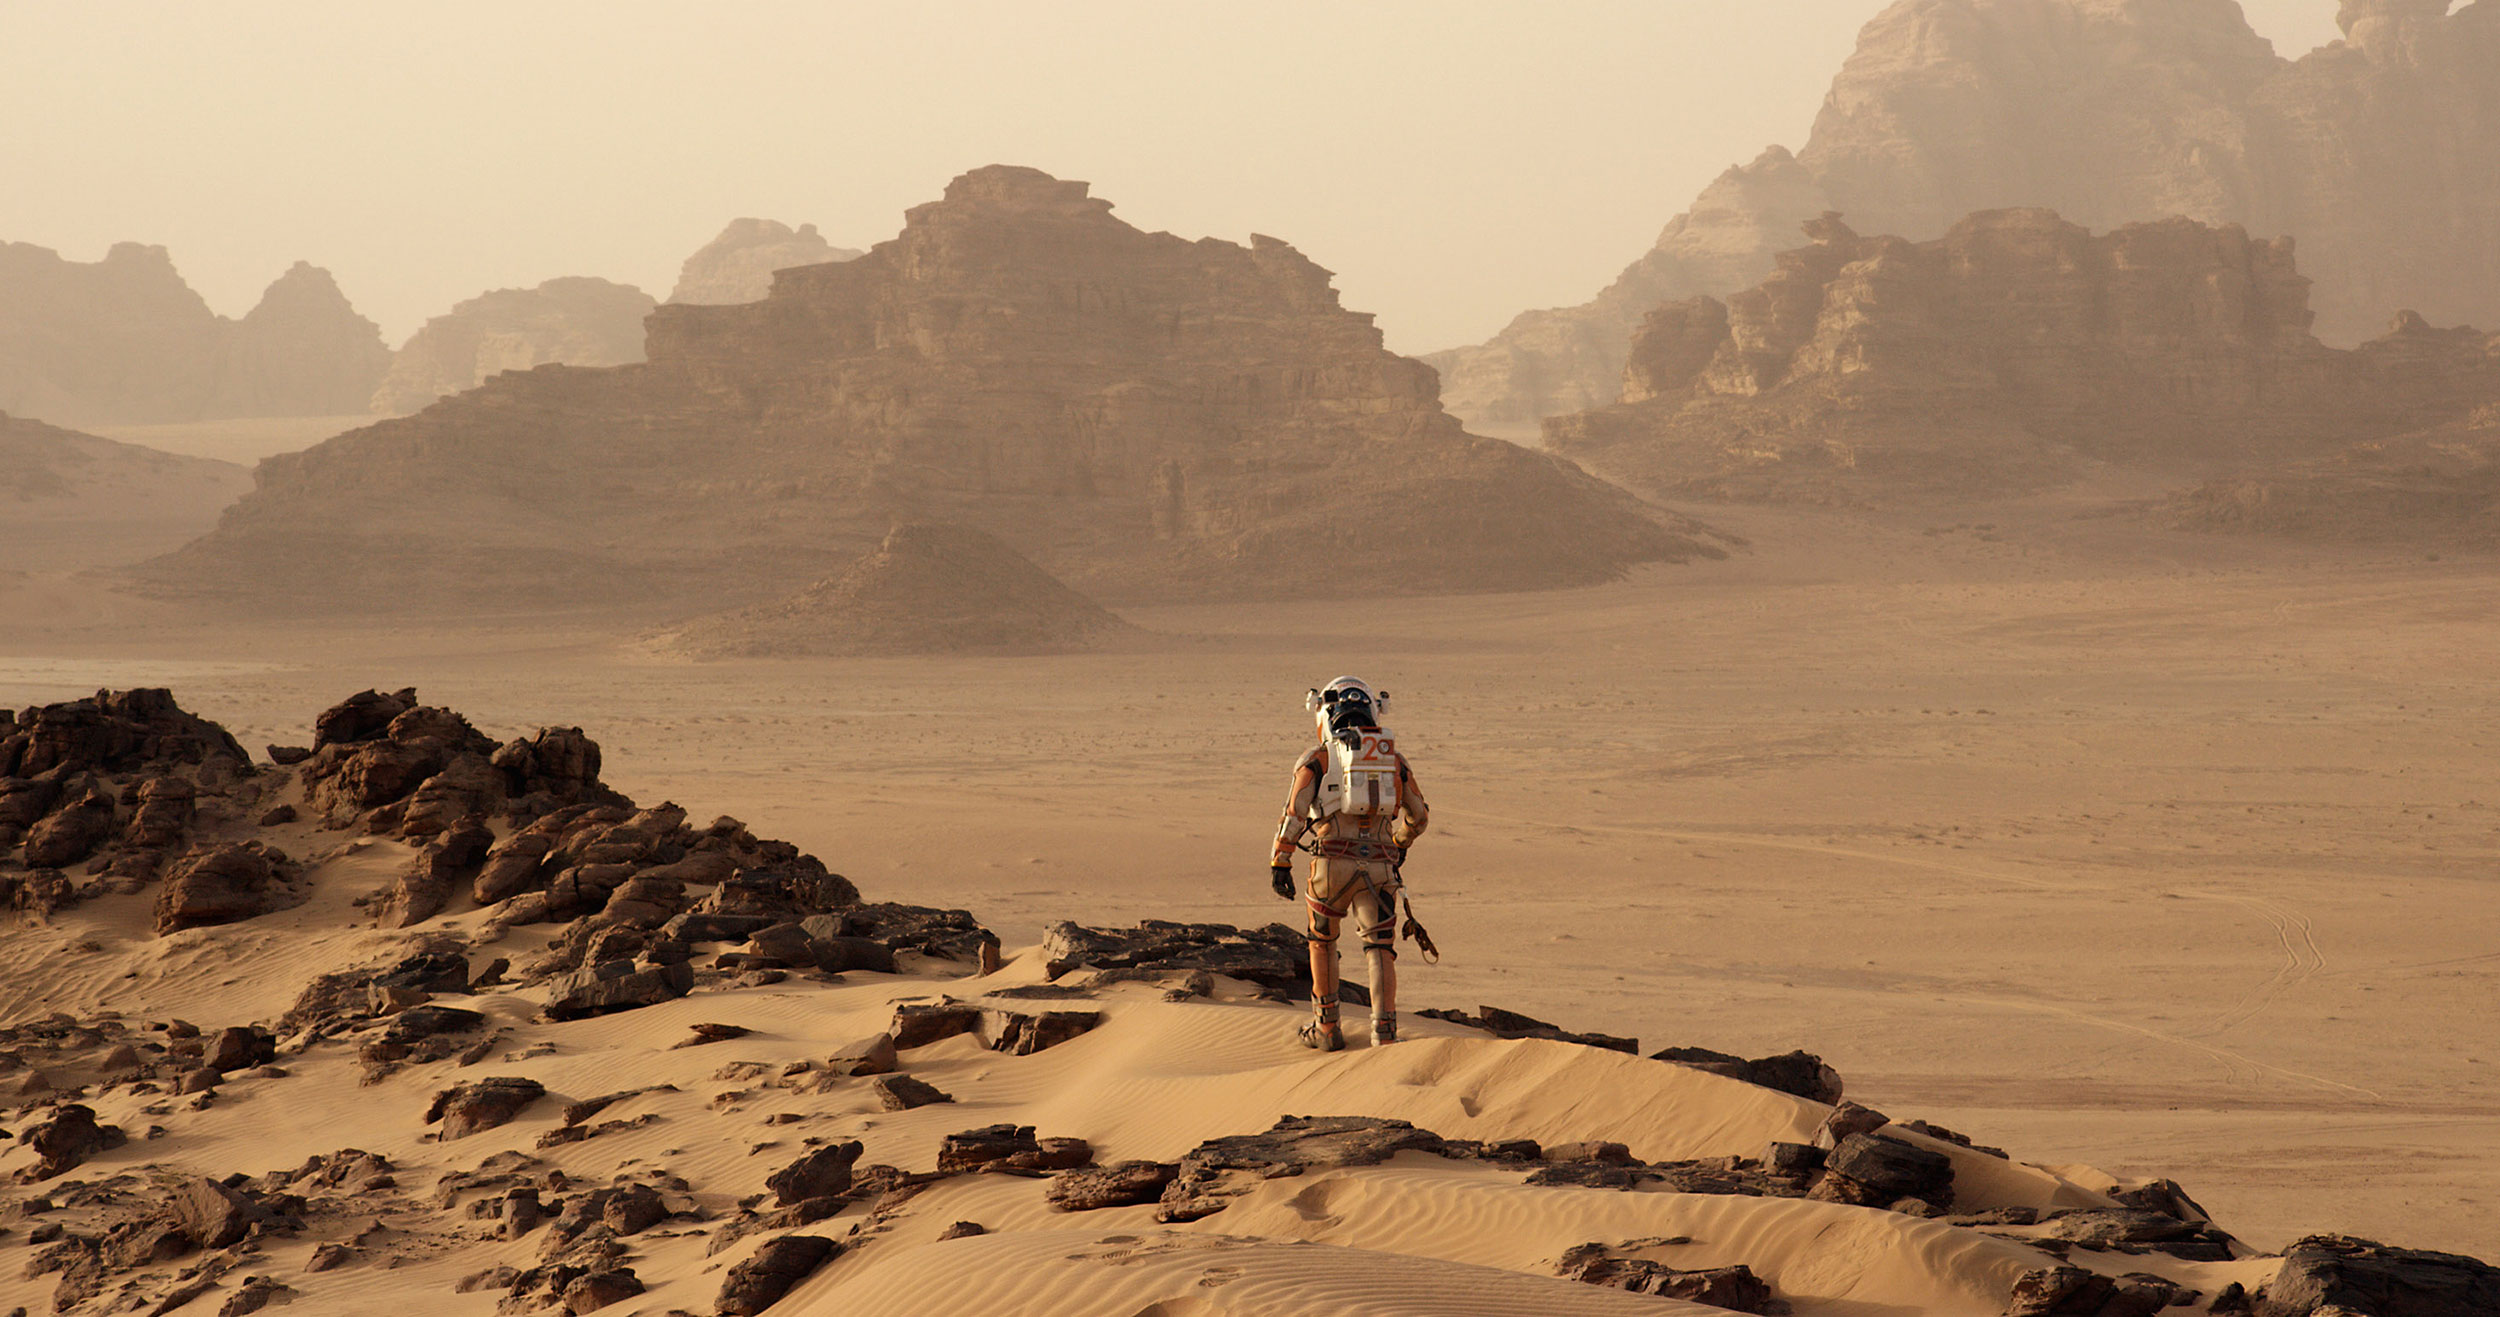 Astronaut Mark Watney finds himself stranded and alone on the Red Planet. Credit: Twentieth Century Fox Film Corporation